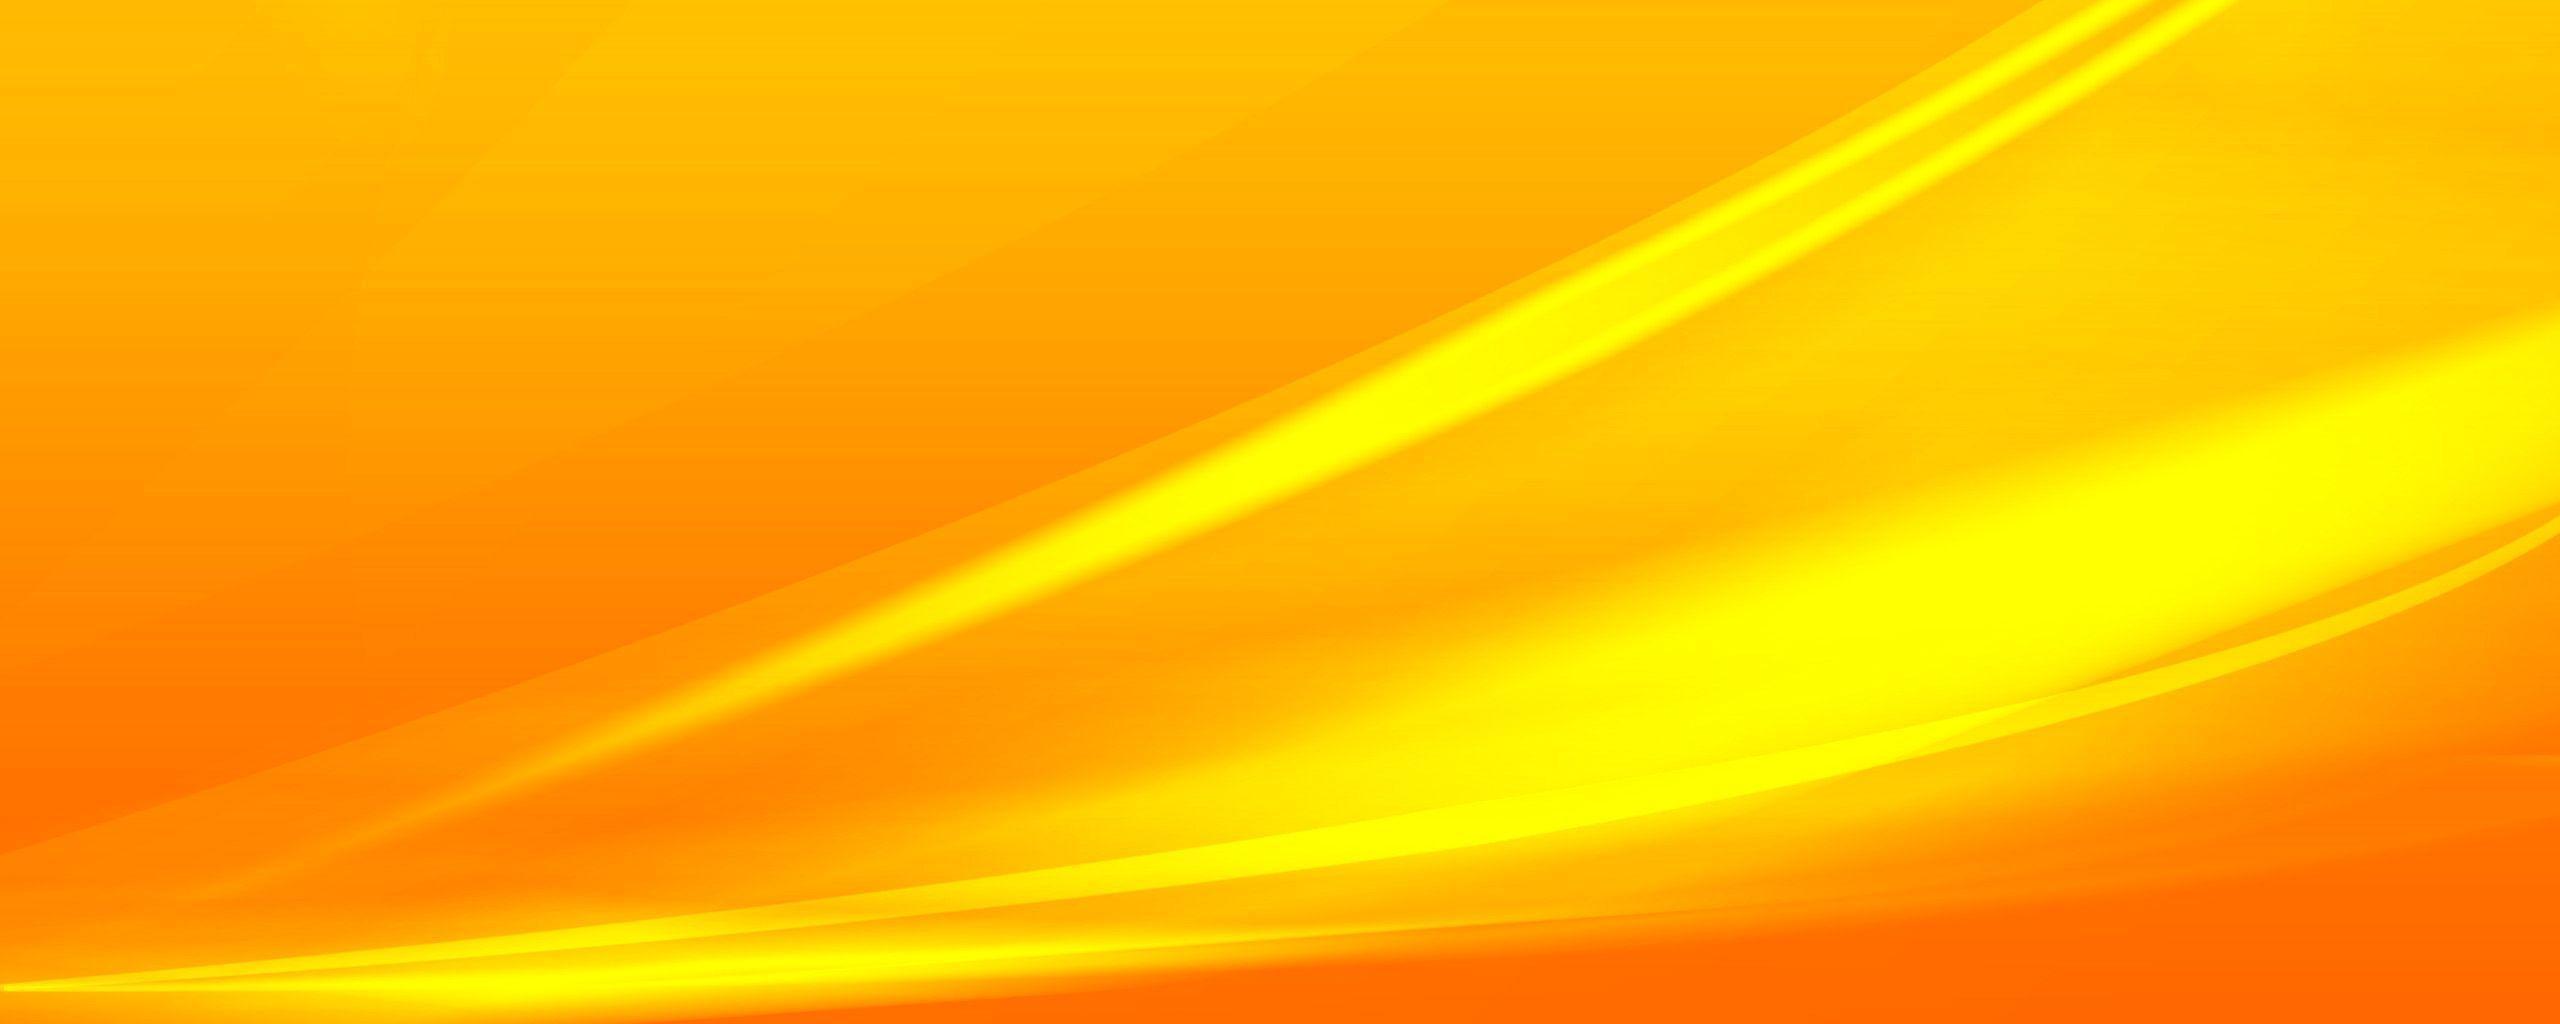 yellow and orange ppt background